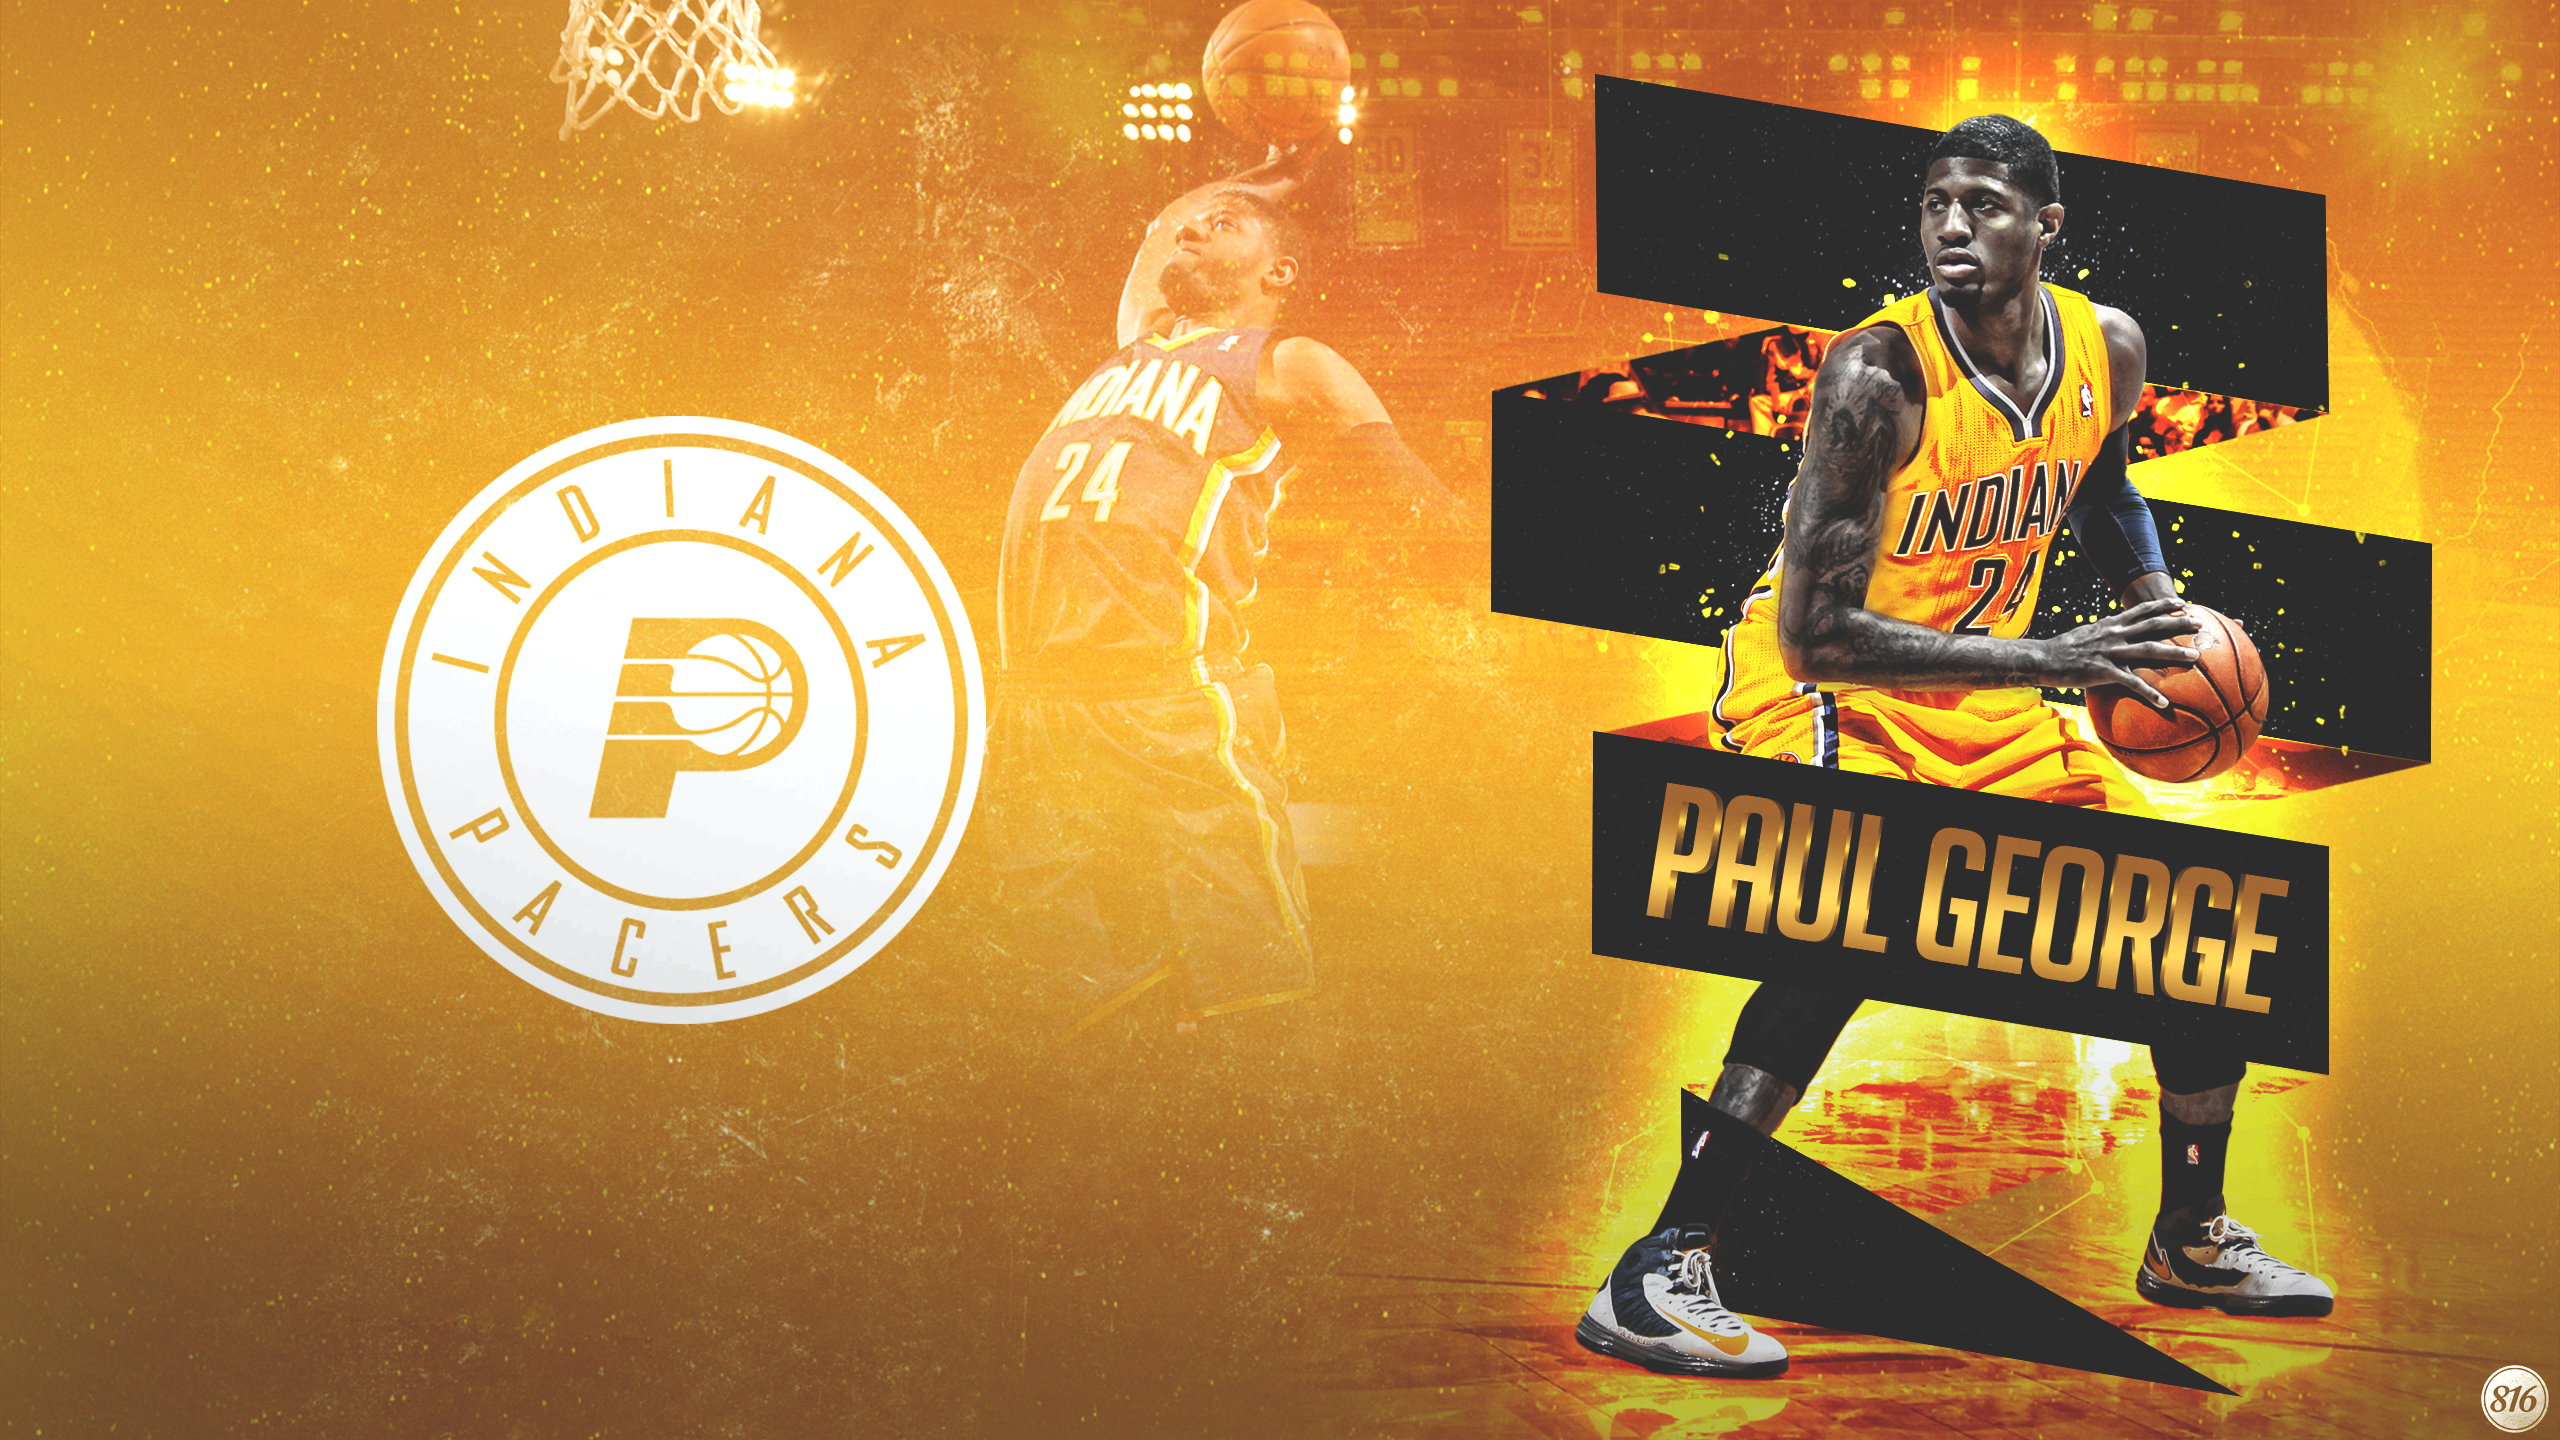 Wallpaper paul george paul george indiana pacers indiana pacers 2560x1440